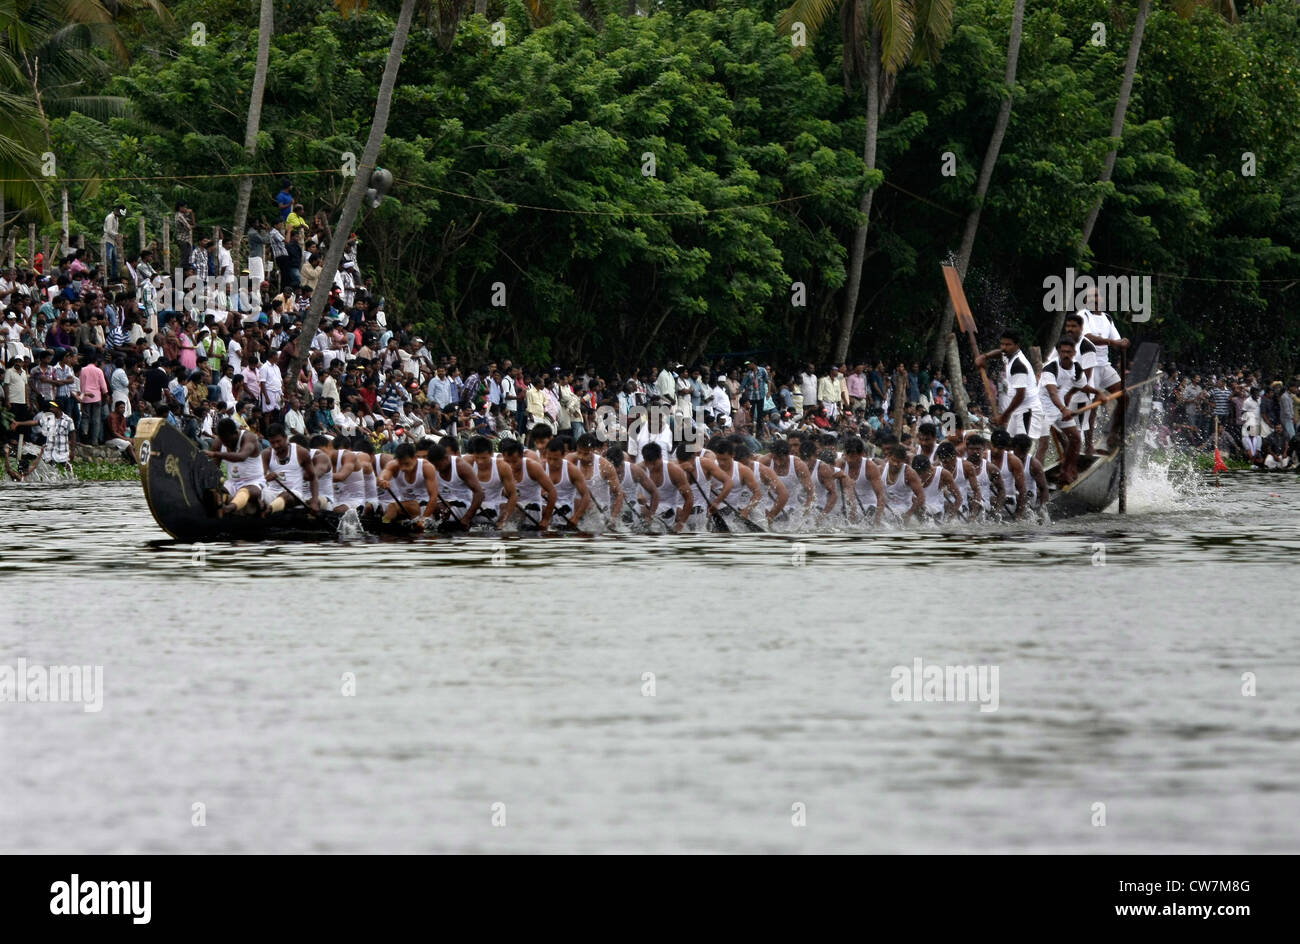 rowers from nehru trophy boat race in alappuzha  back waters formerly known as alleppey,kerala,india Stock Photo